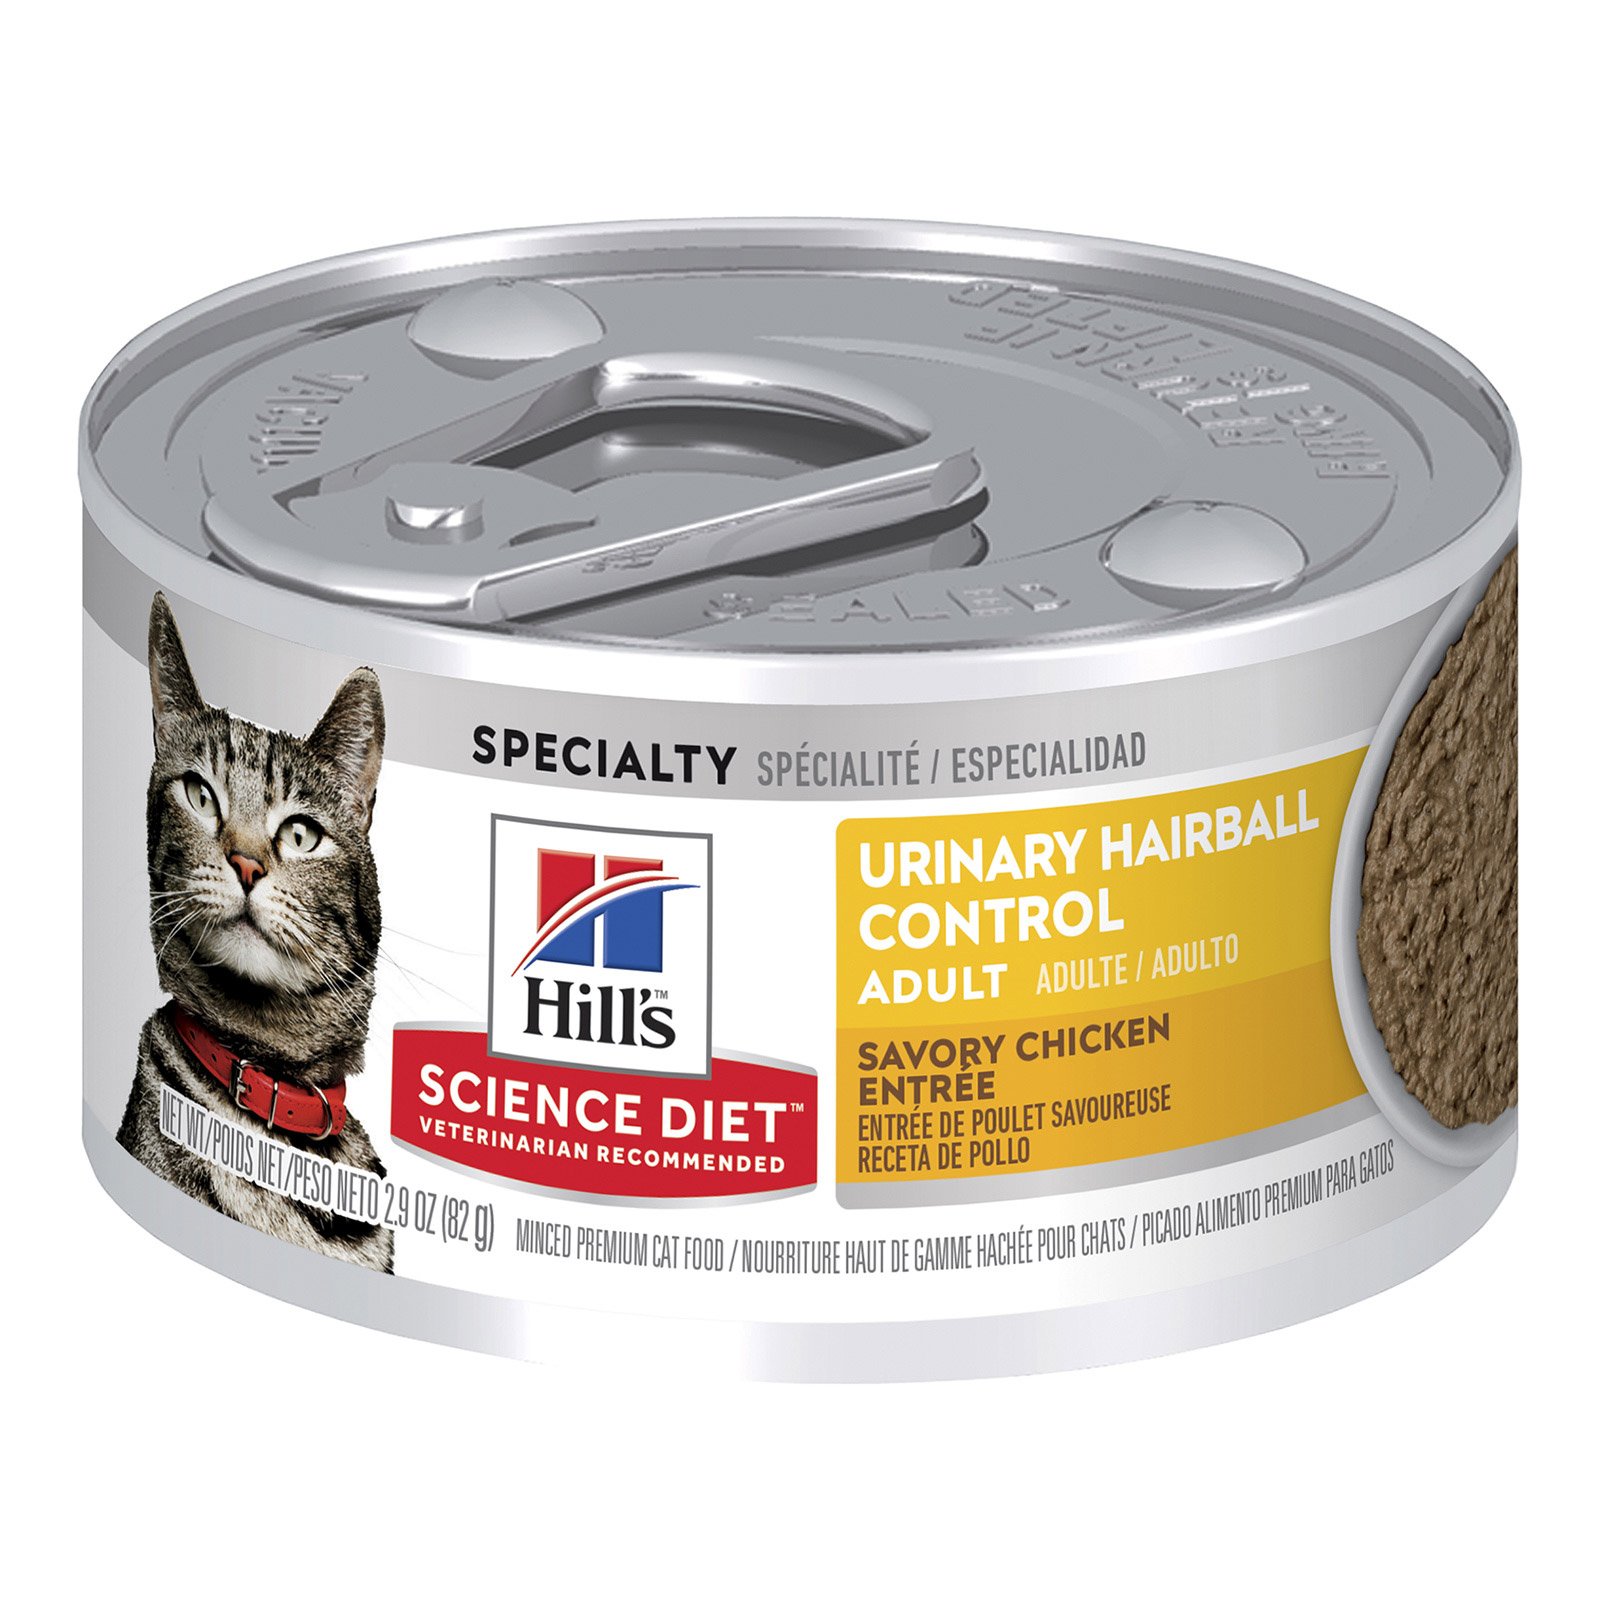 Hill's Science Diet Adult Urinary Hairball Control Chicken Entree Canned Cat Food